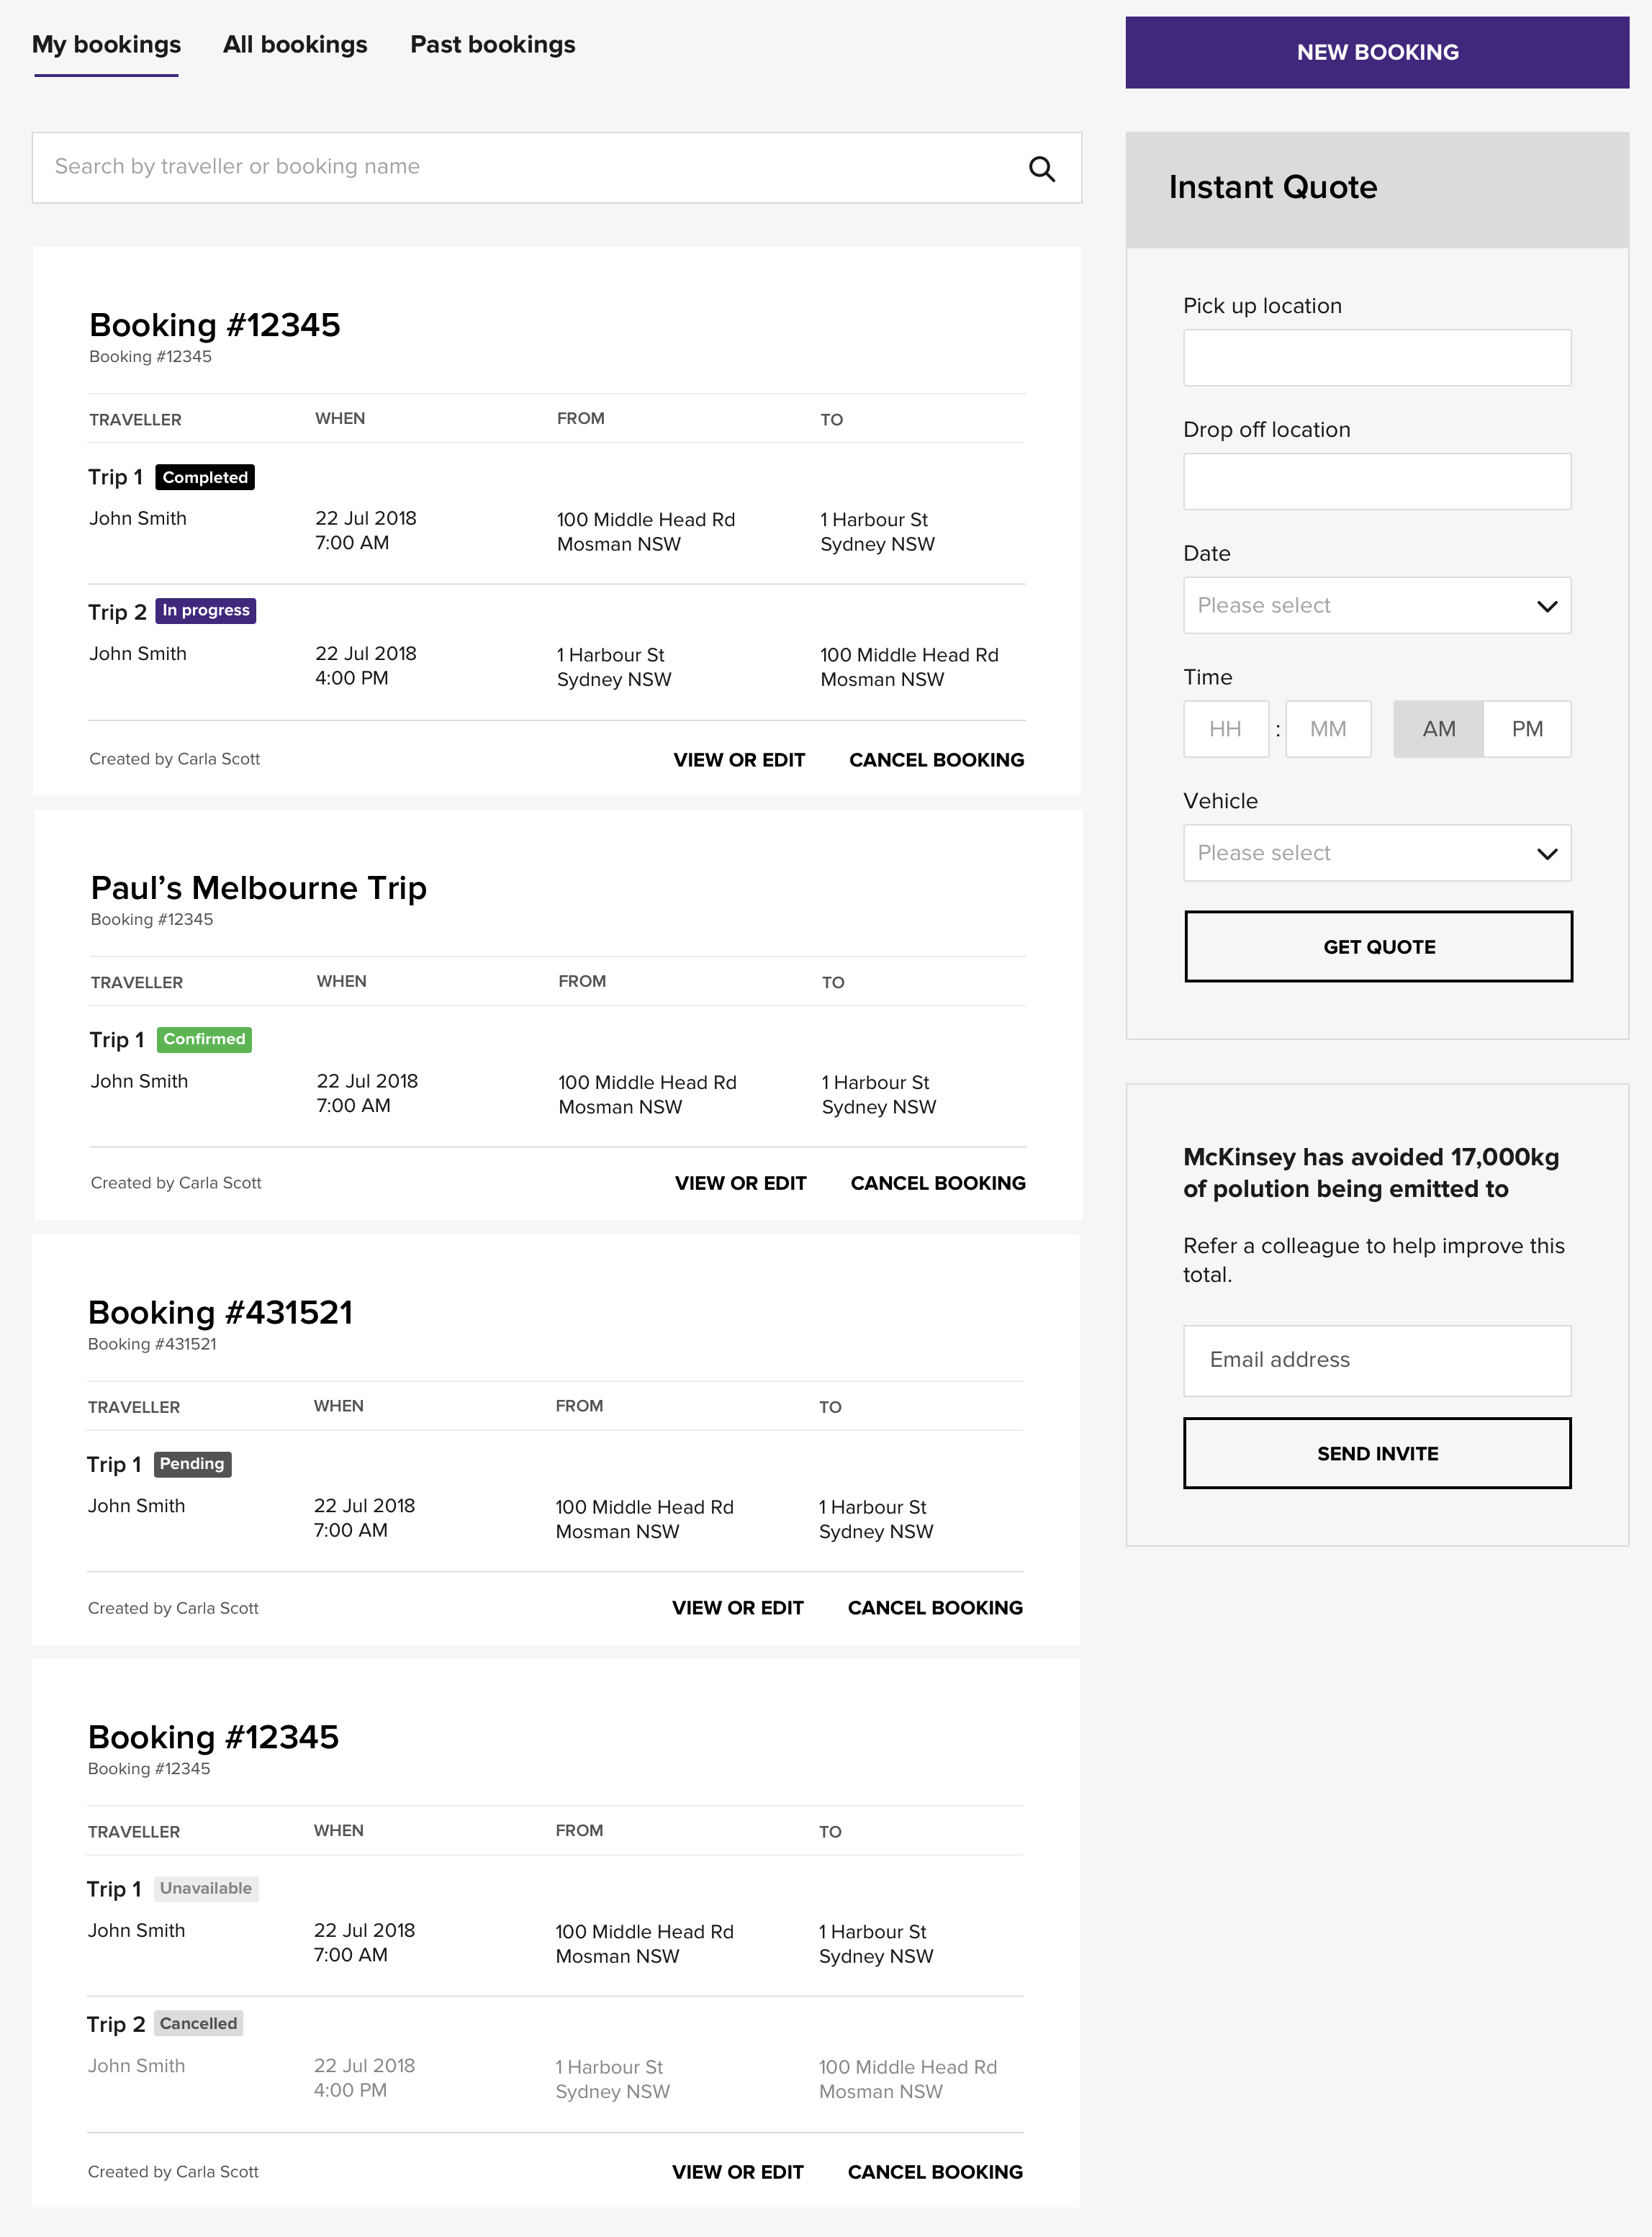 Screnshot of booking portal dashboard with list of upcoming trips